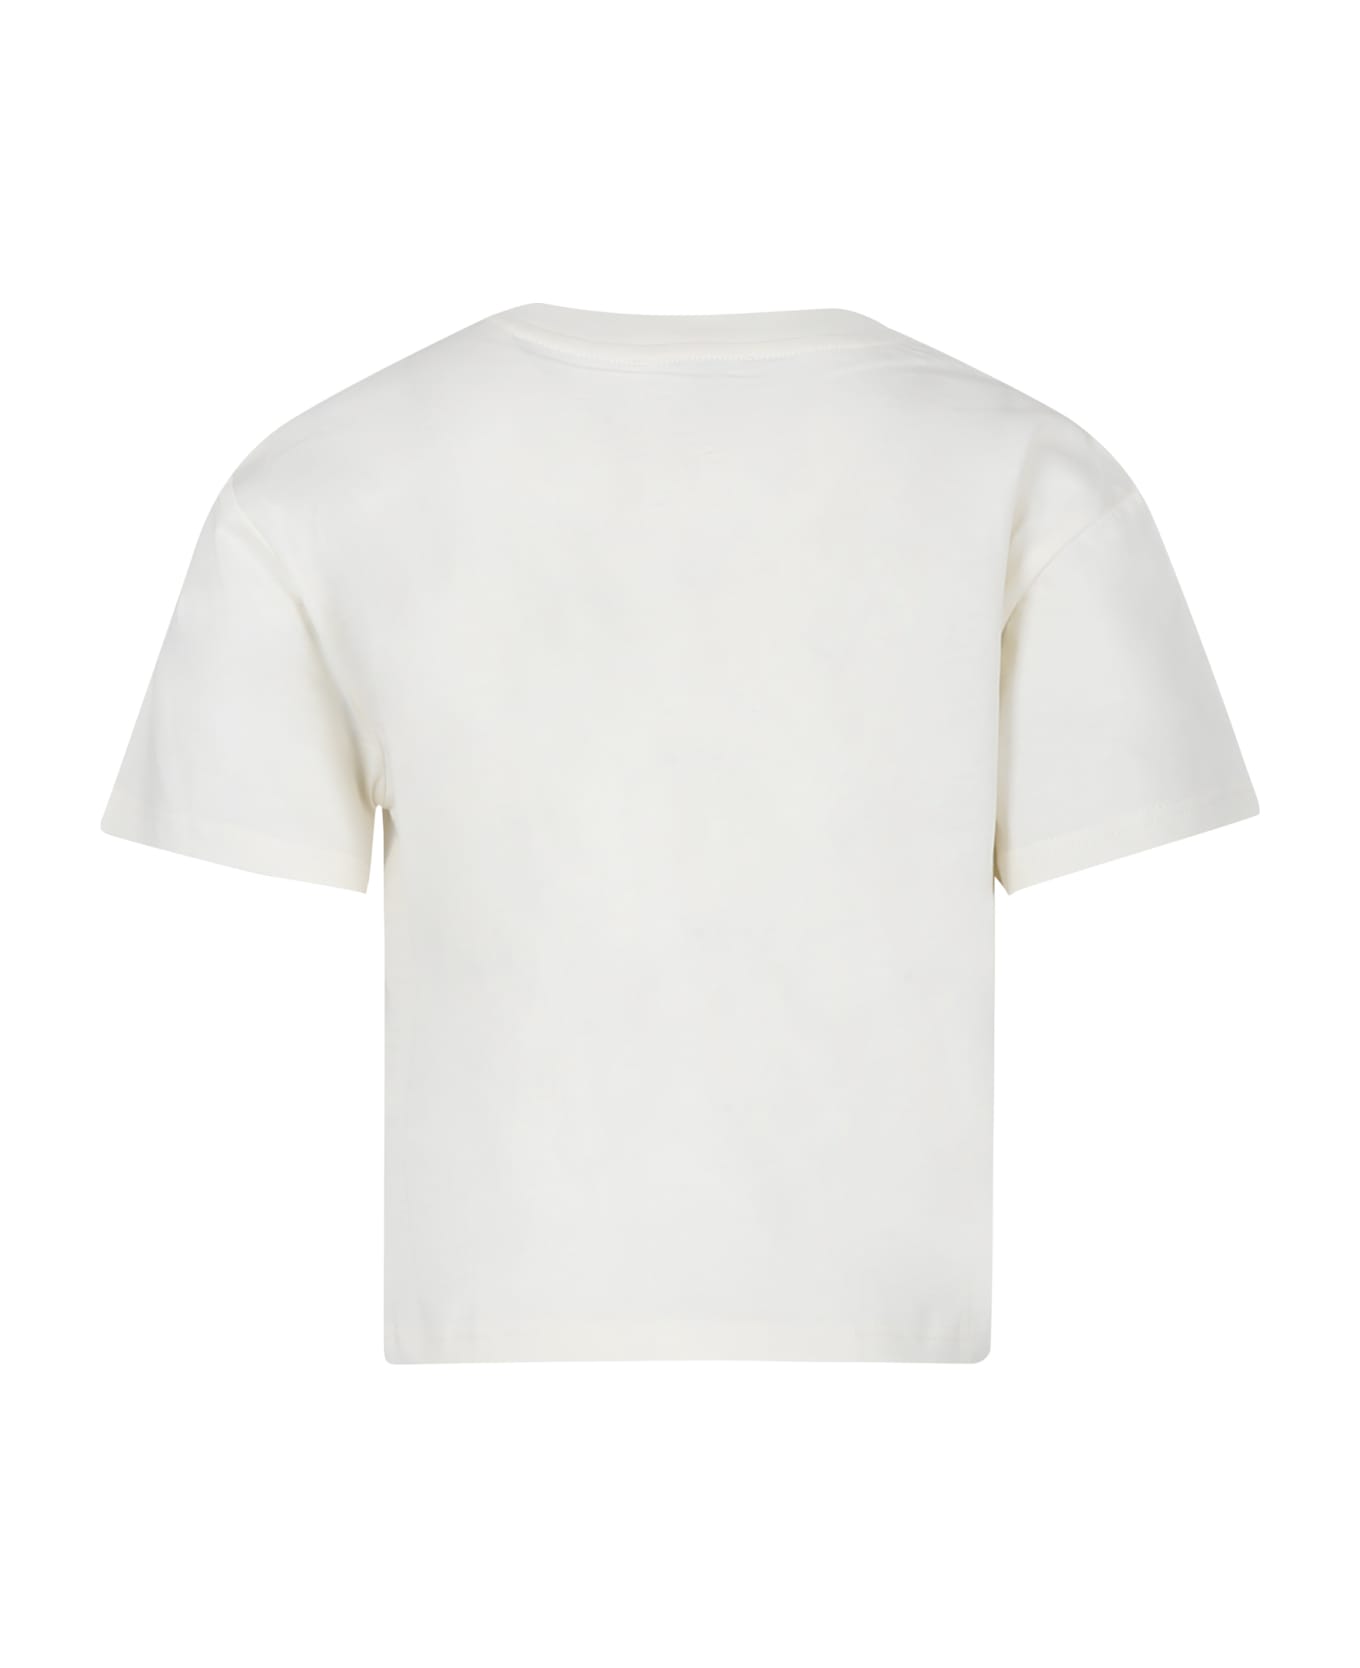 Lanvin Ivory T-shirt For Boy With Logo - Giallo